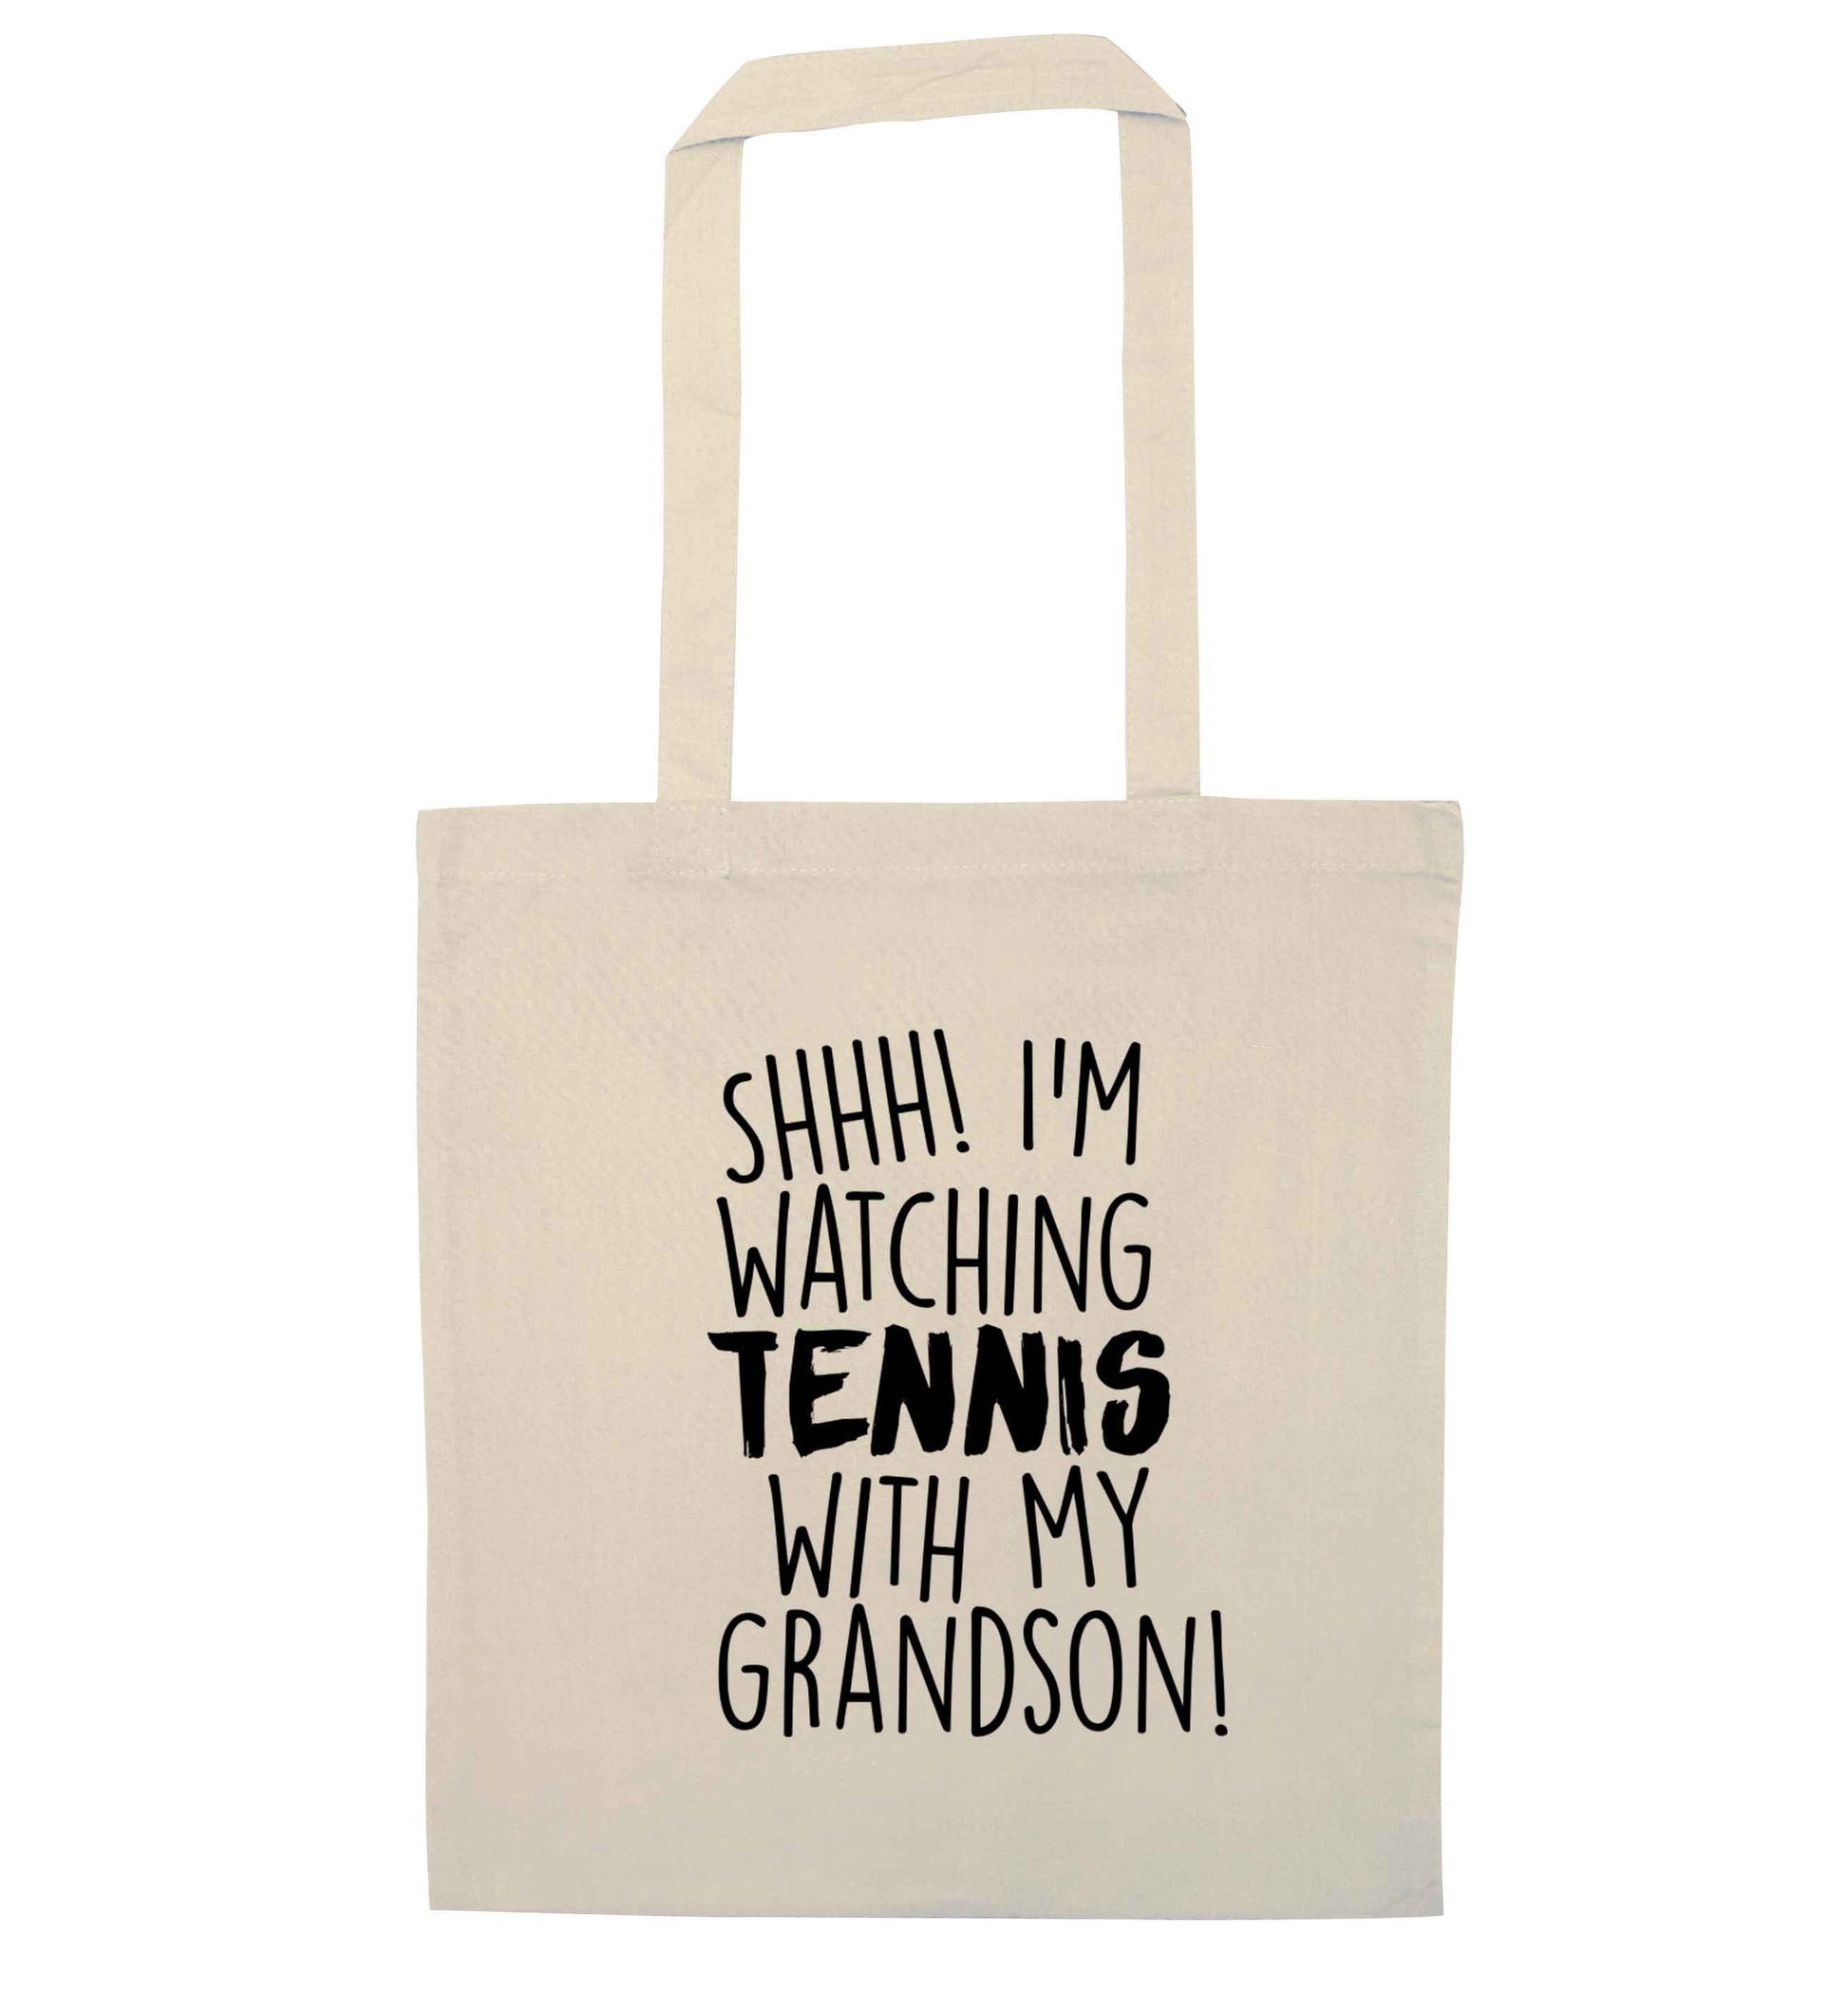 Shh! I'm watching tennis with my grandson! natural tote bag